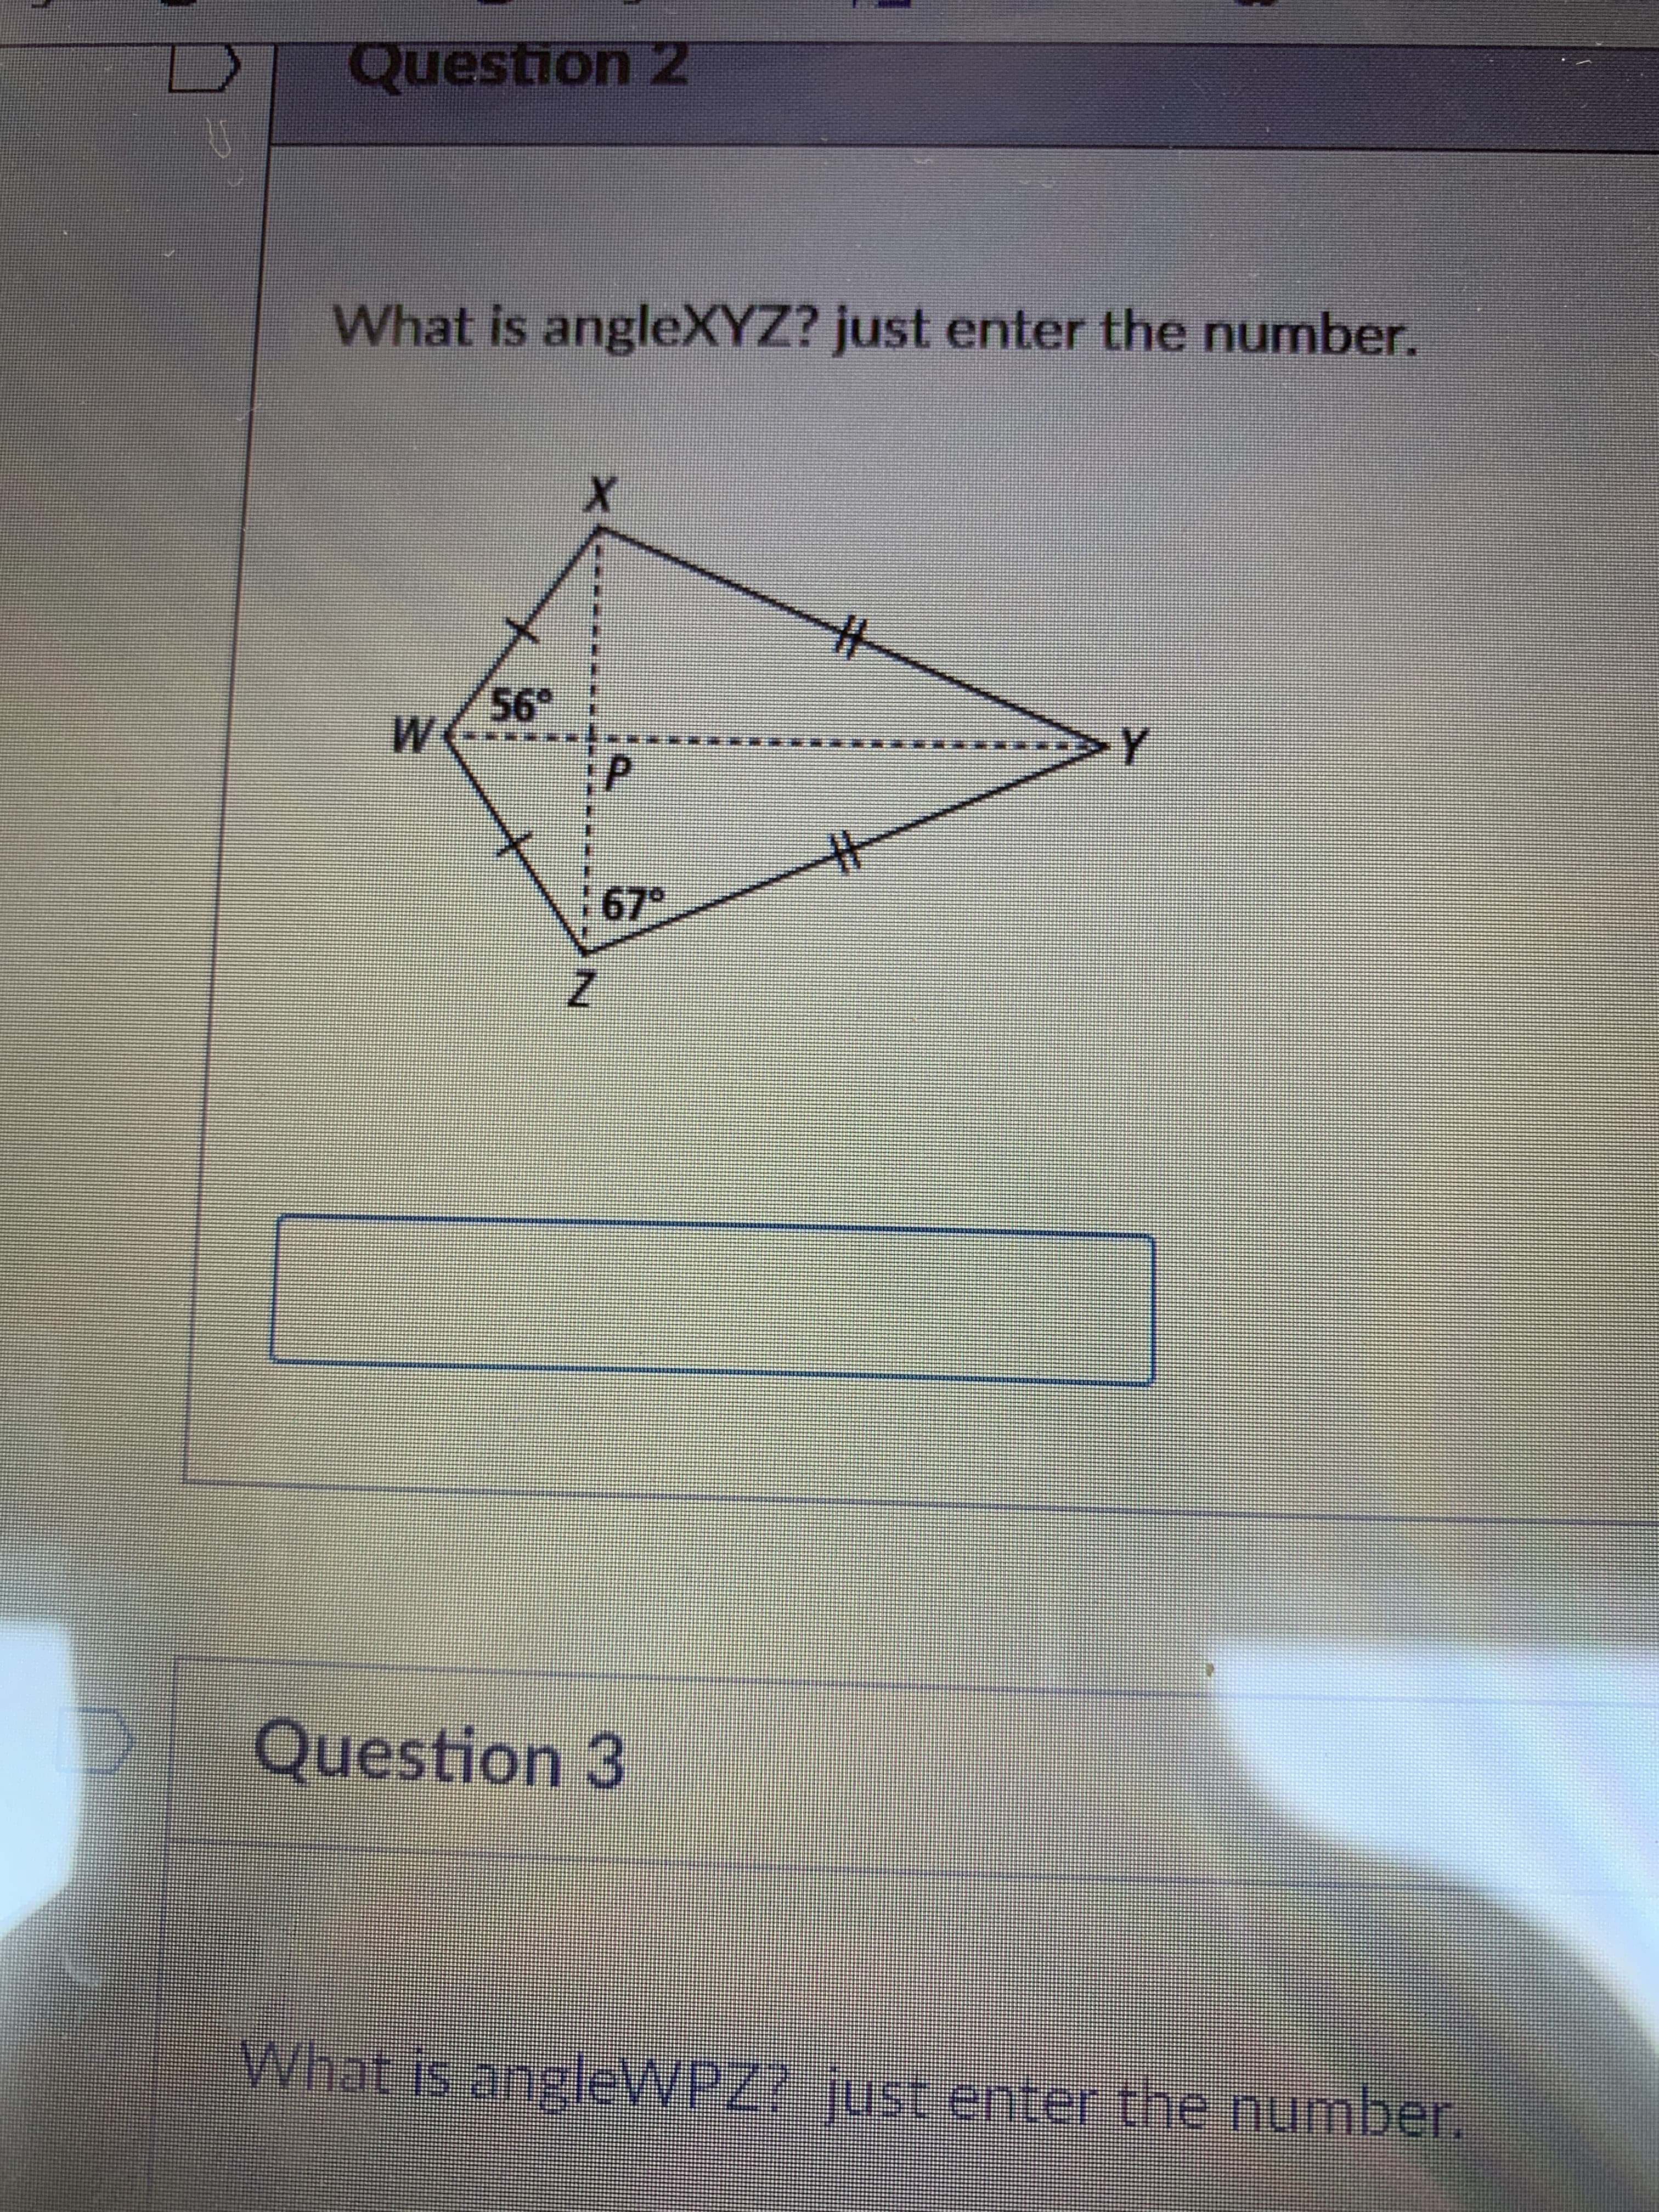 What is angleXYZ? just enter the number.
56
M
Question 3
What is angleWPZ2 just enterthe number.
